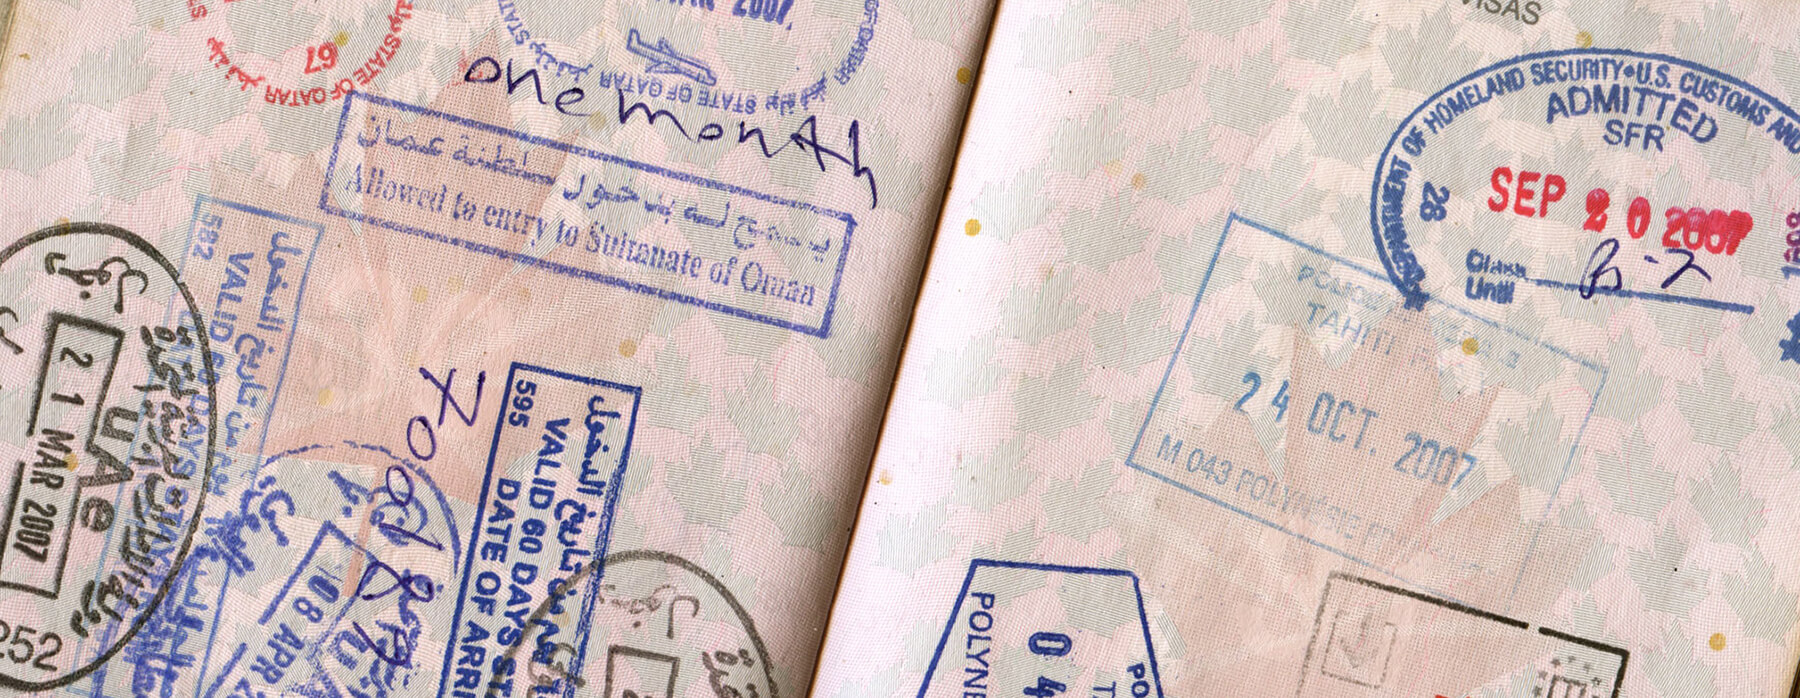 Border control stamps in passport